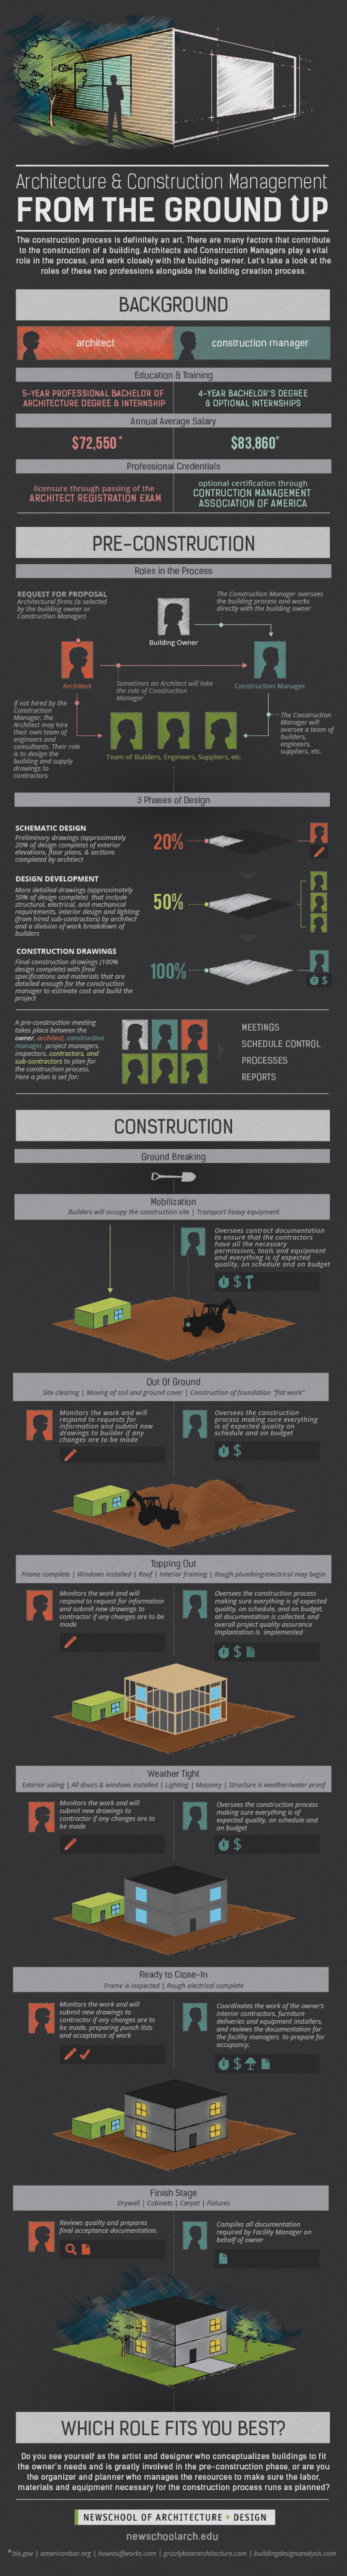 Architecture and Construction Management from the Ground Up  Infographic